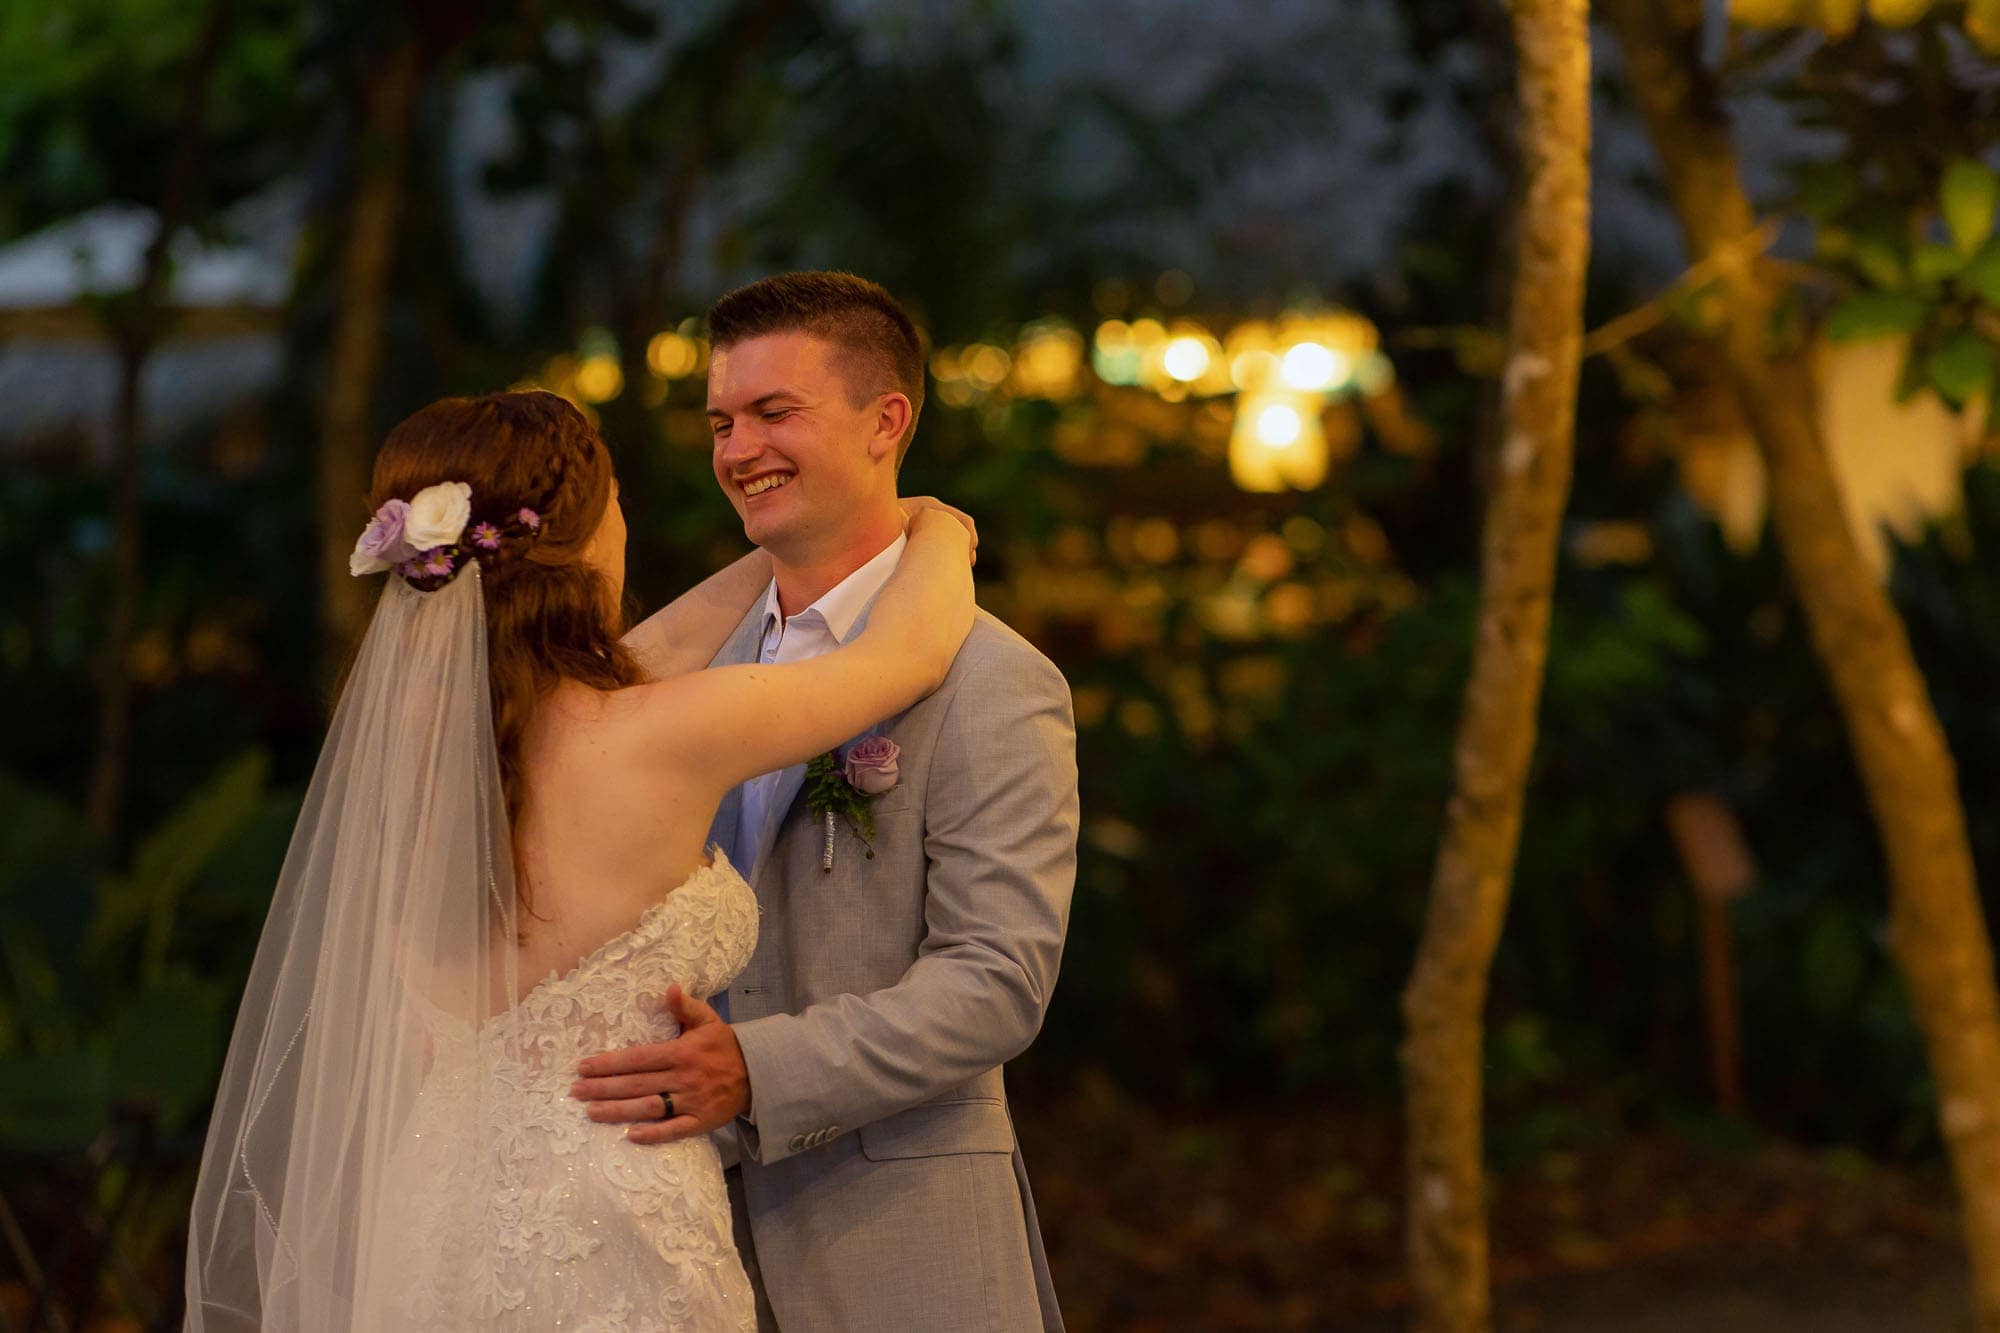 Bride and groom share their first dance at their costa rica wedding